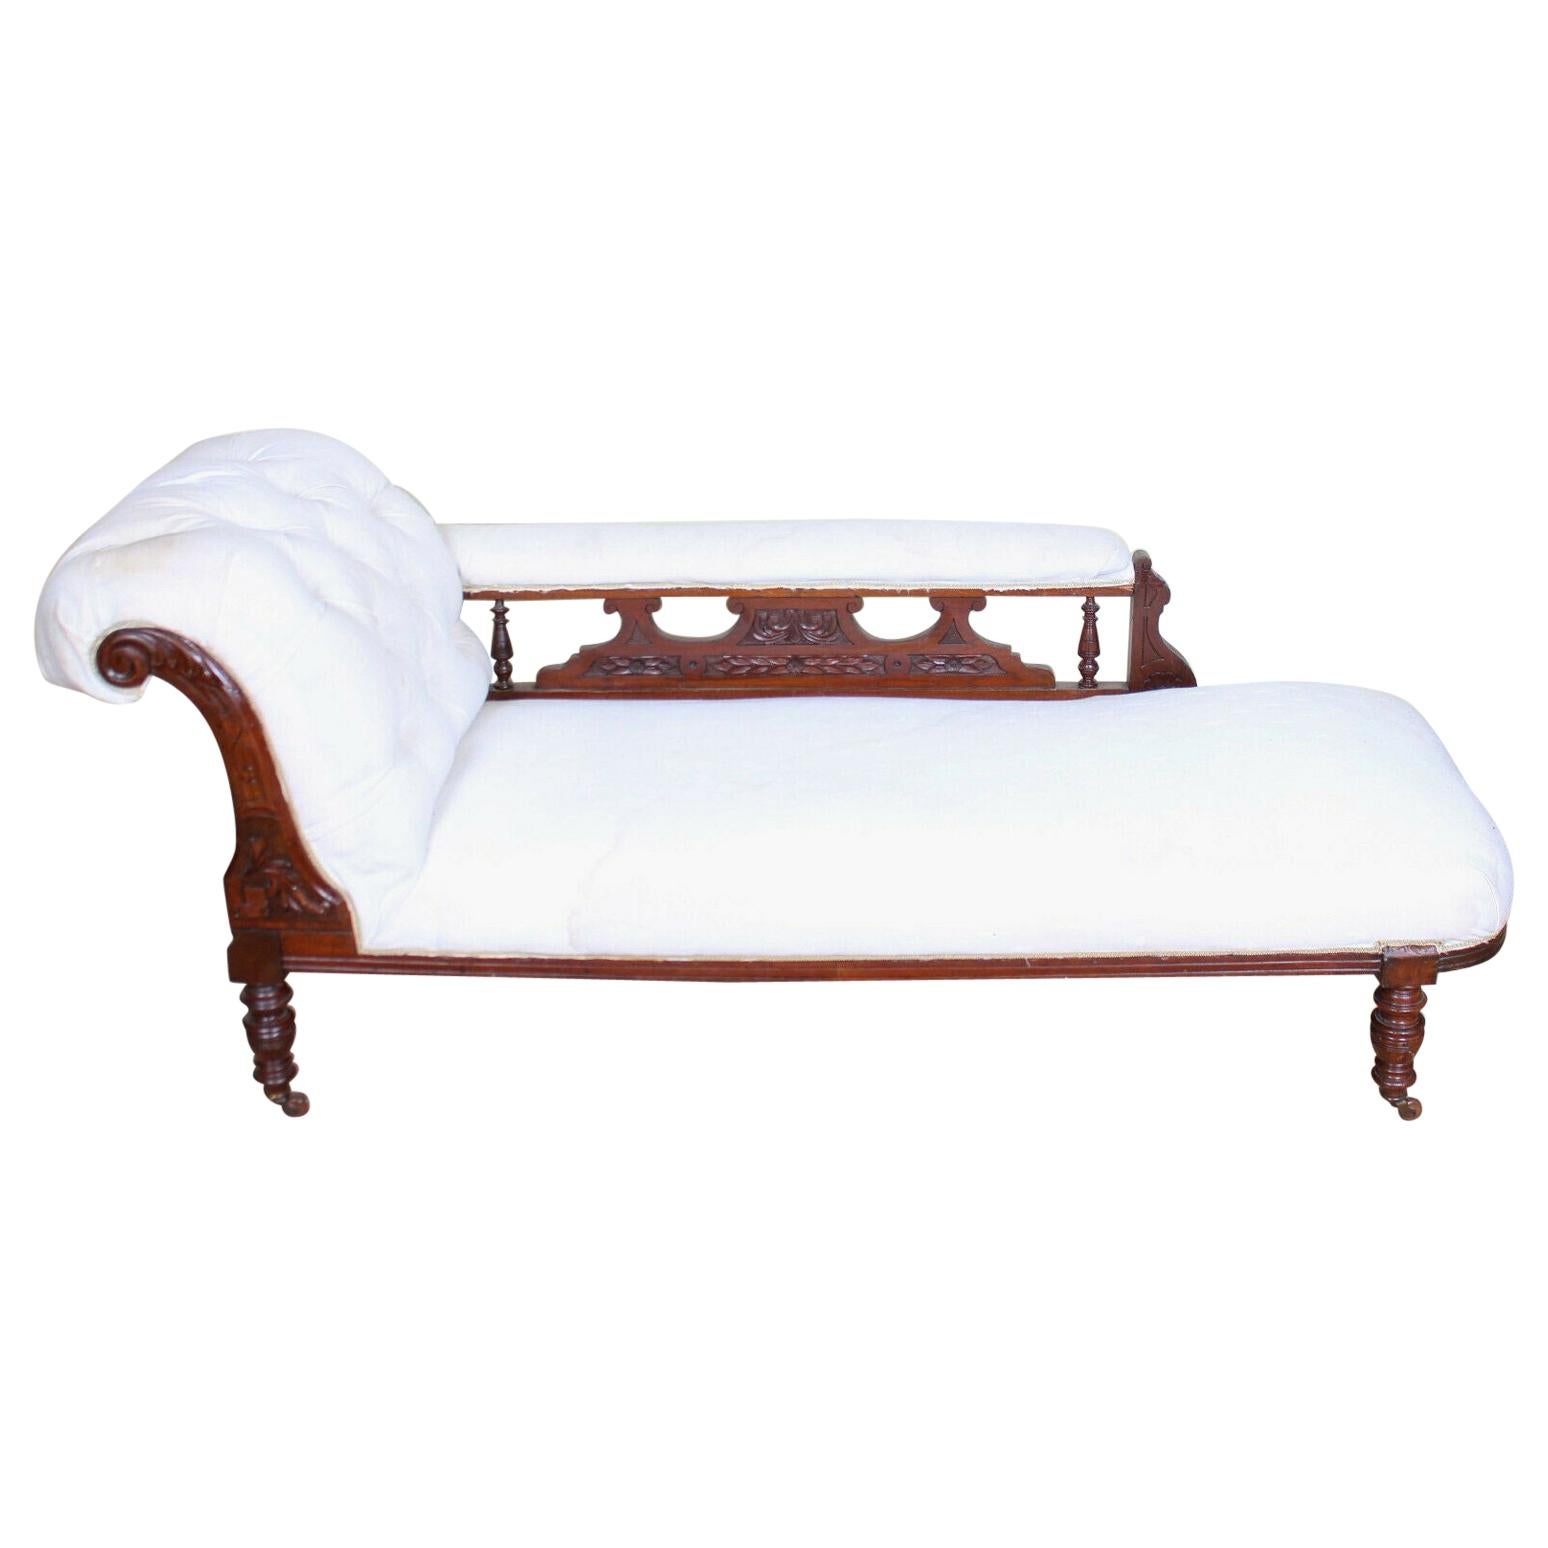 Victorian Chaise Longue Sofa Carved Mahogany For Sale